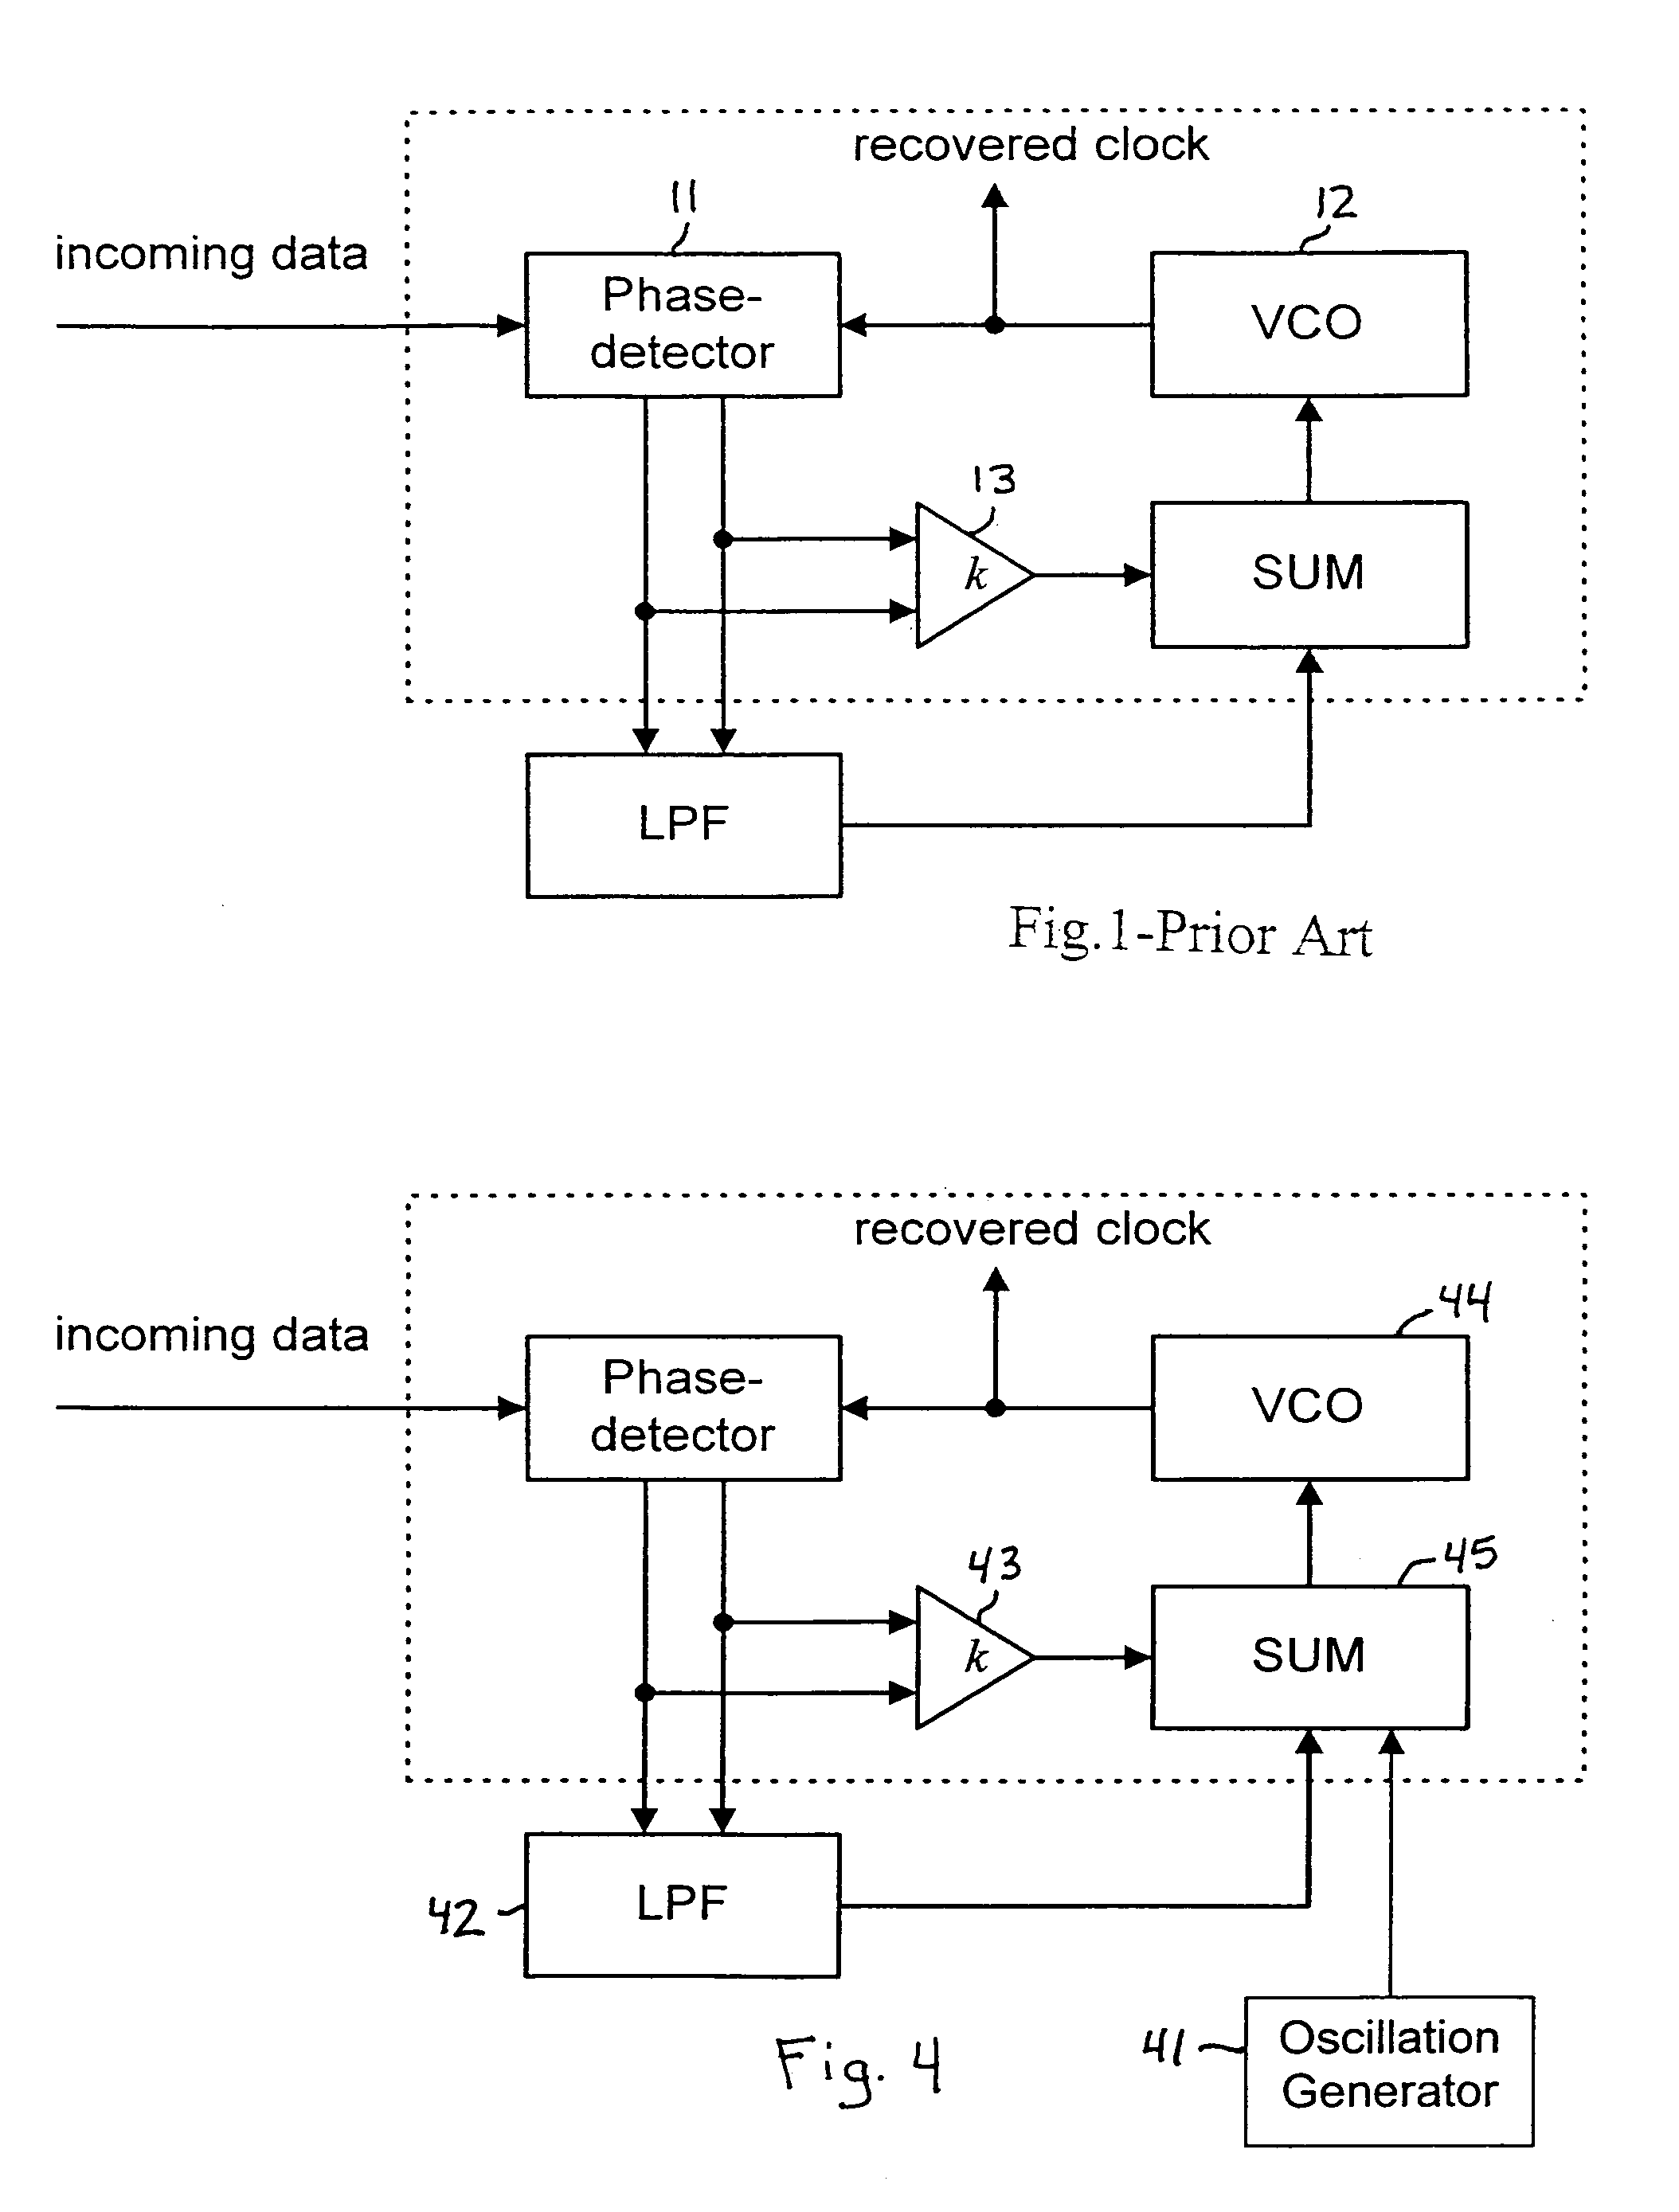 Fast clock acquisition enable method using phase stir injection to PLL for burst mode optical receivers